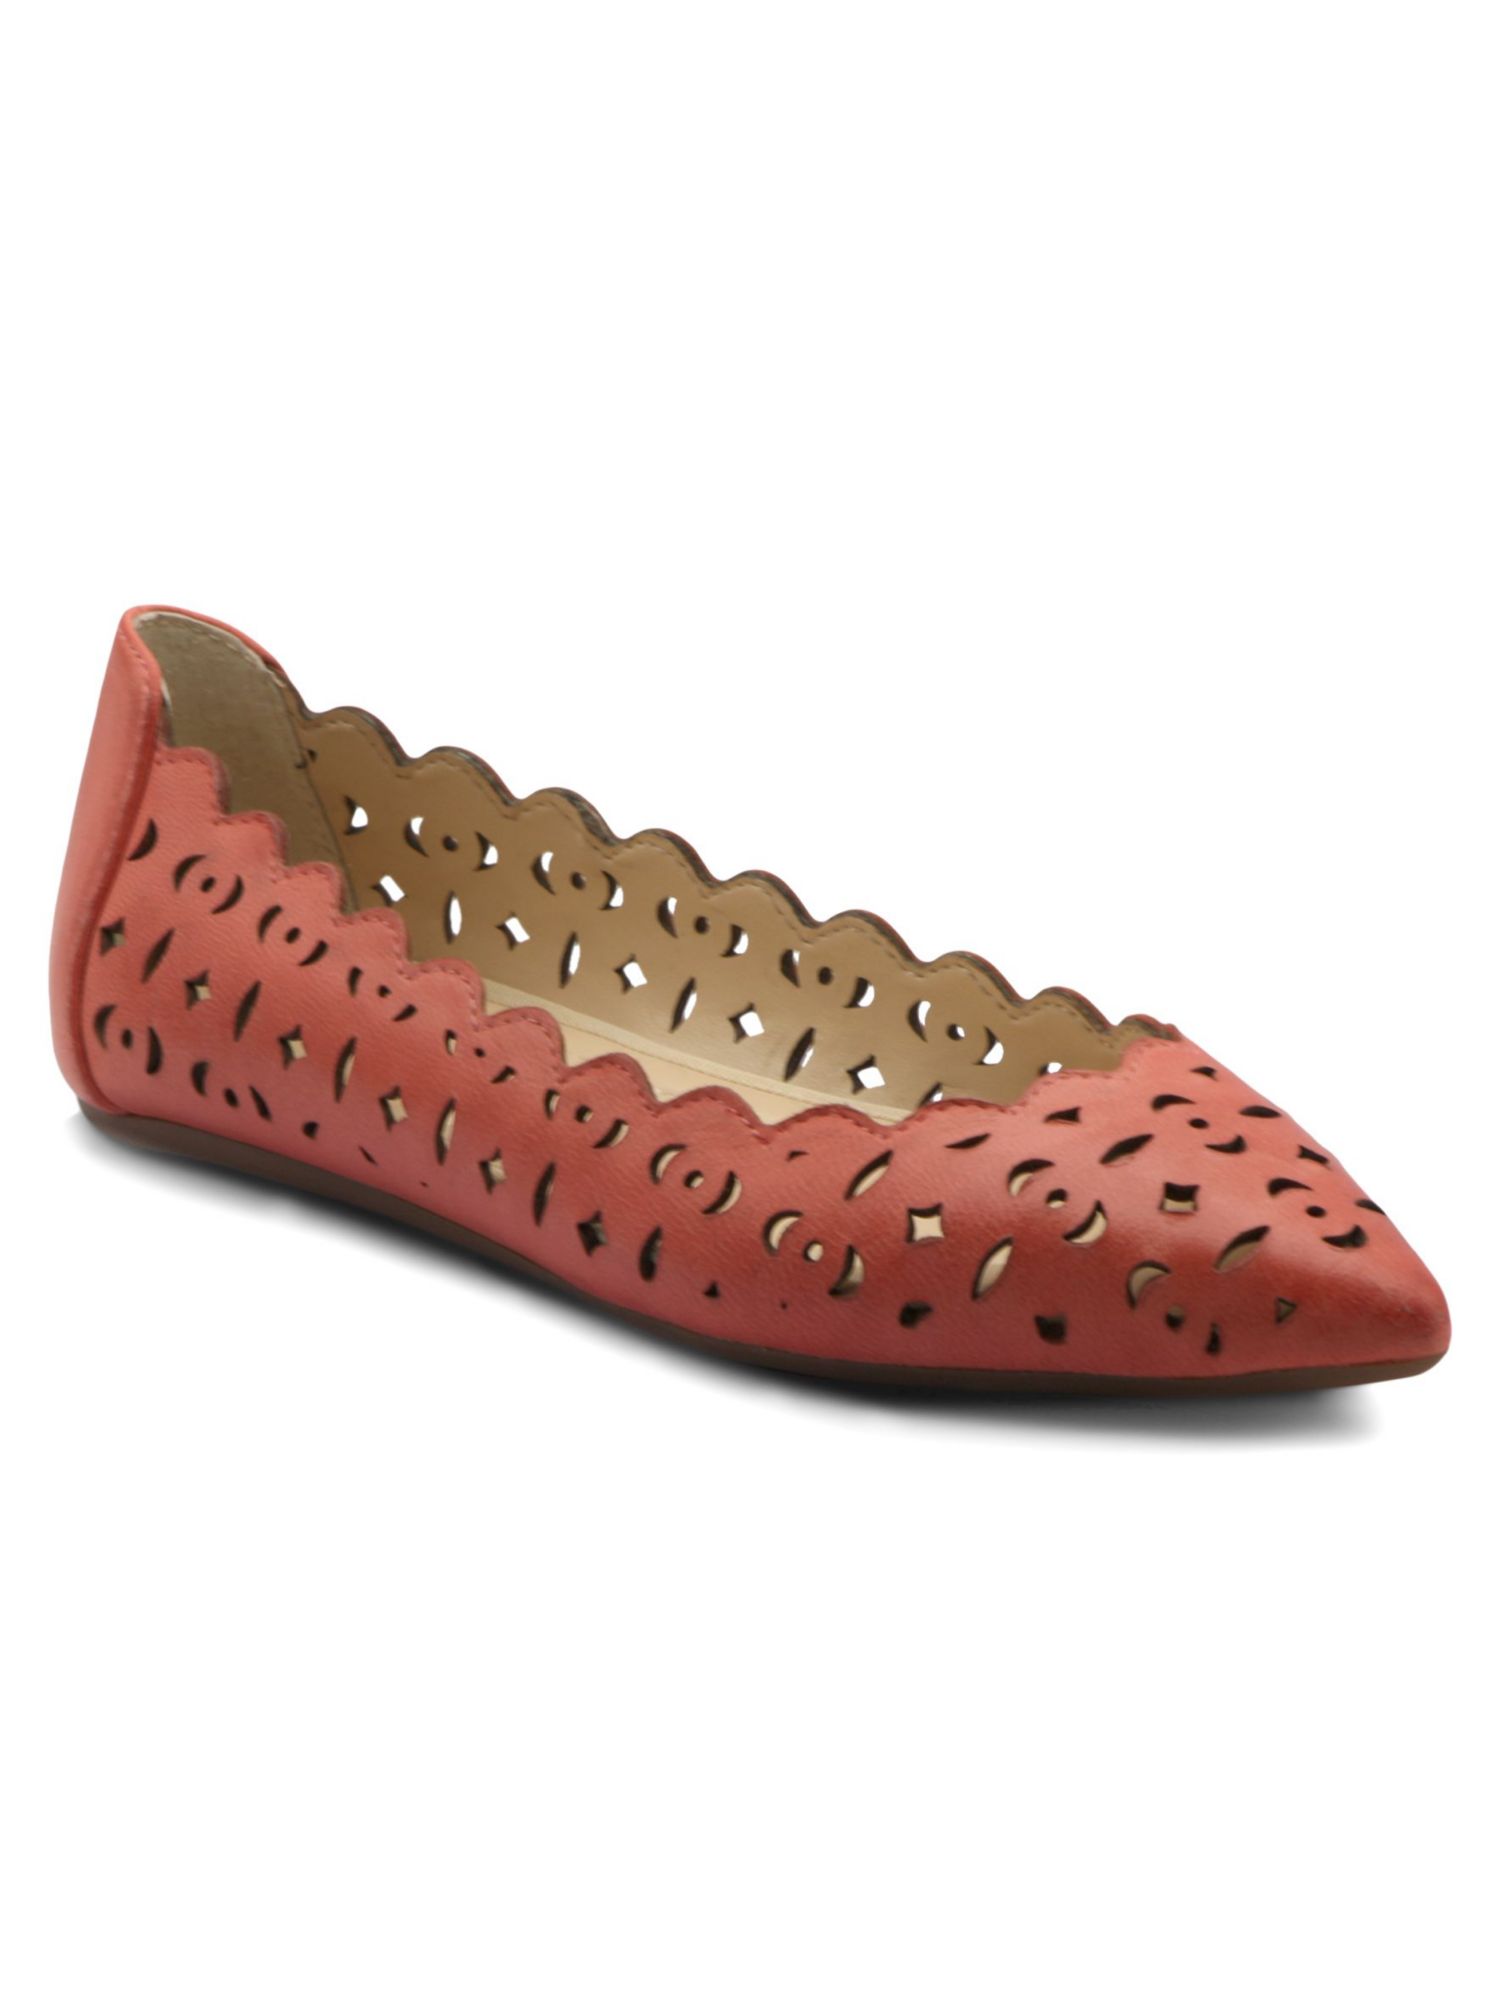 ADRIENNE VITTADINI Womens Coral Laser Cut Scalloped Padded Forst Pointed Toe Slip On Leather Flats 7 M